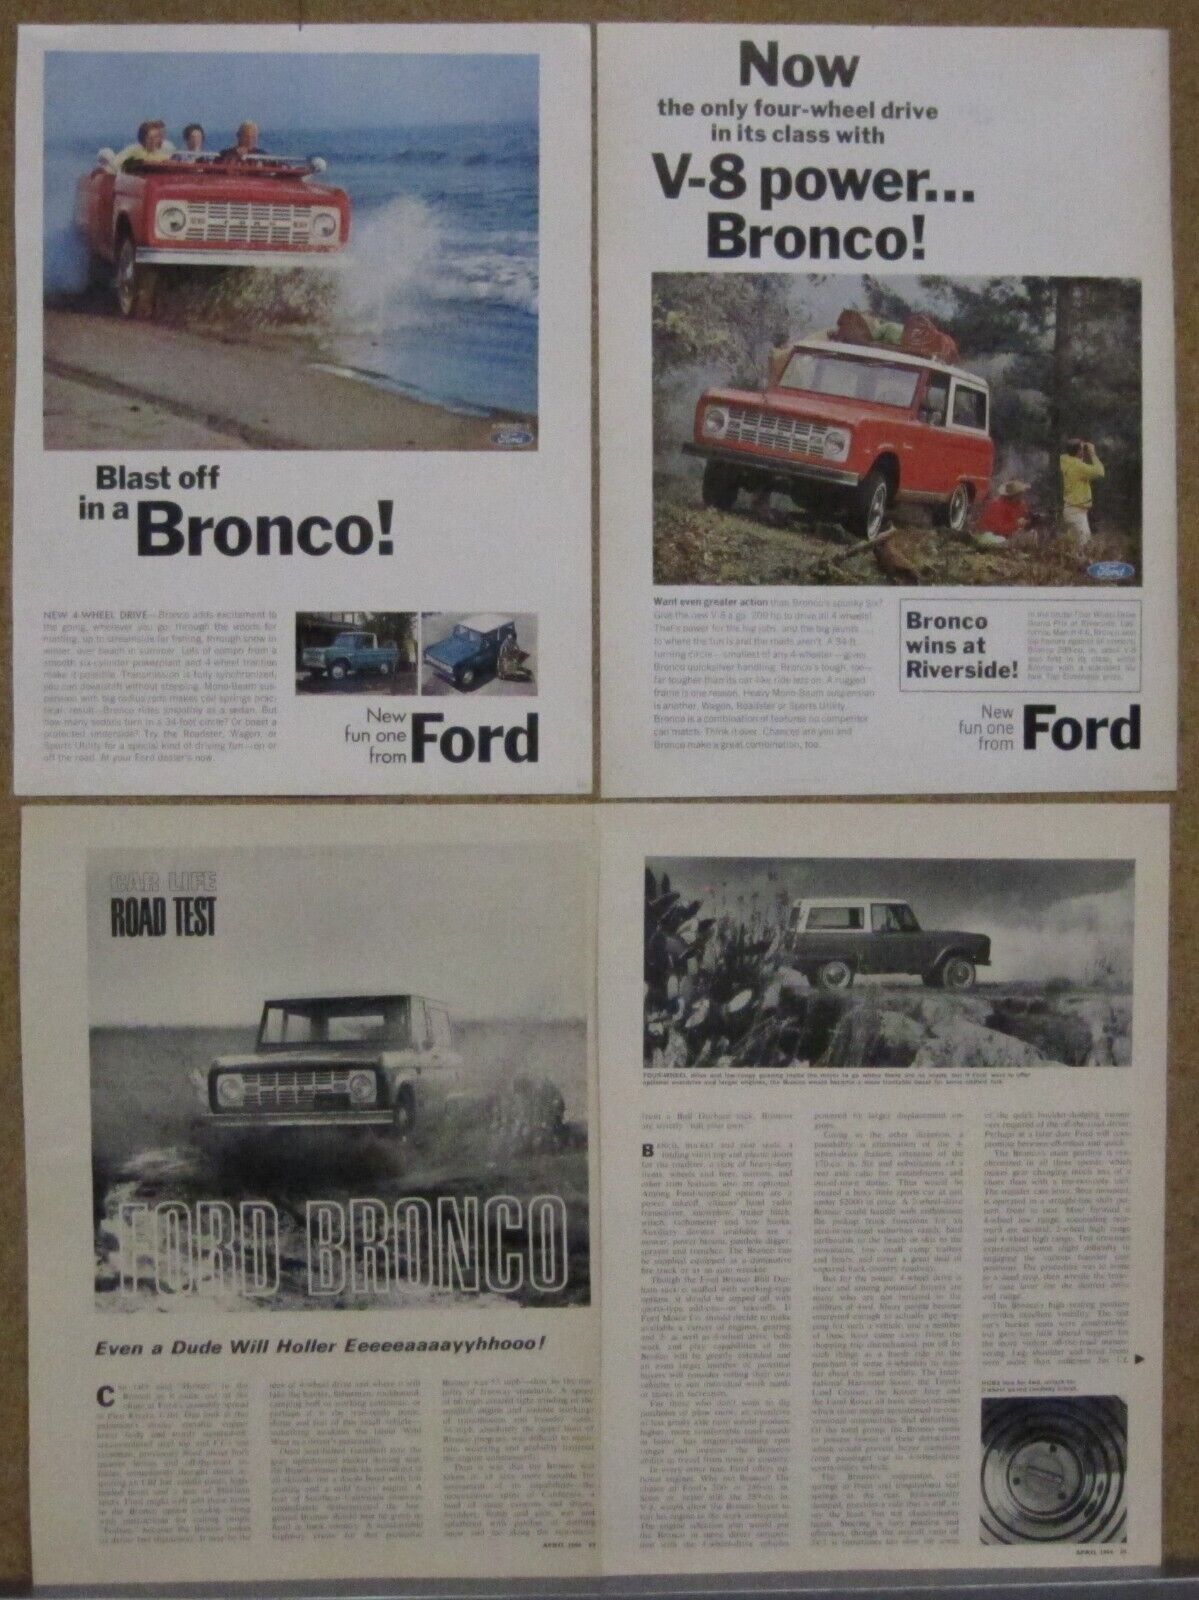 1966 Ford Bronco Ad (2); Road test